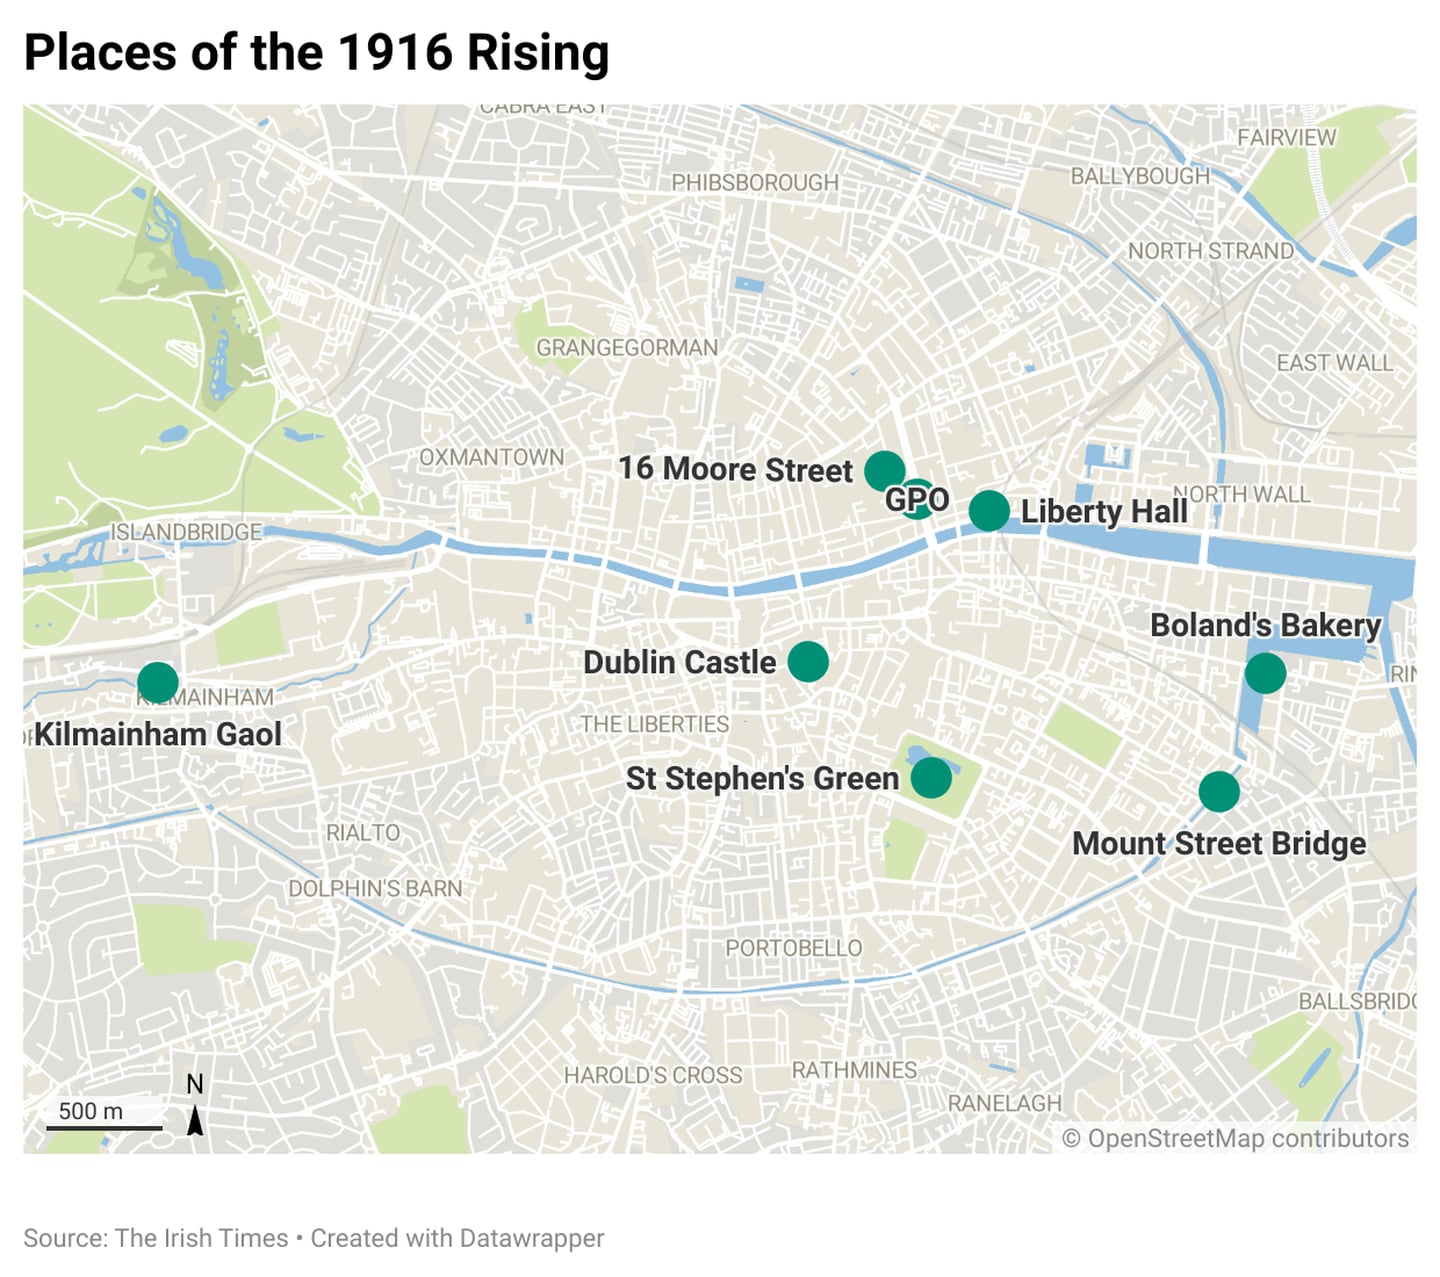 1916 places of the Rising